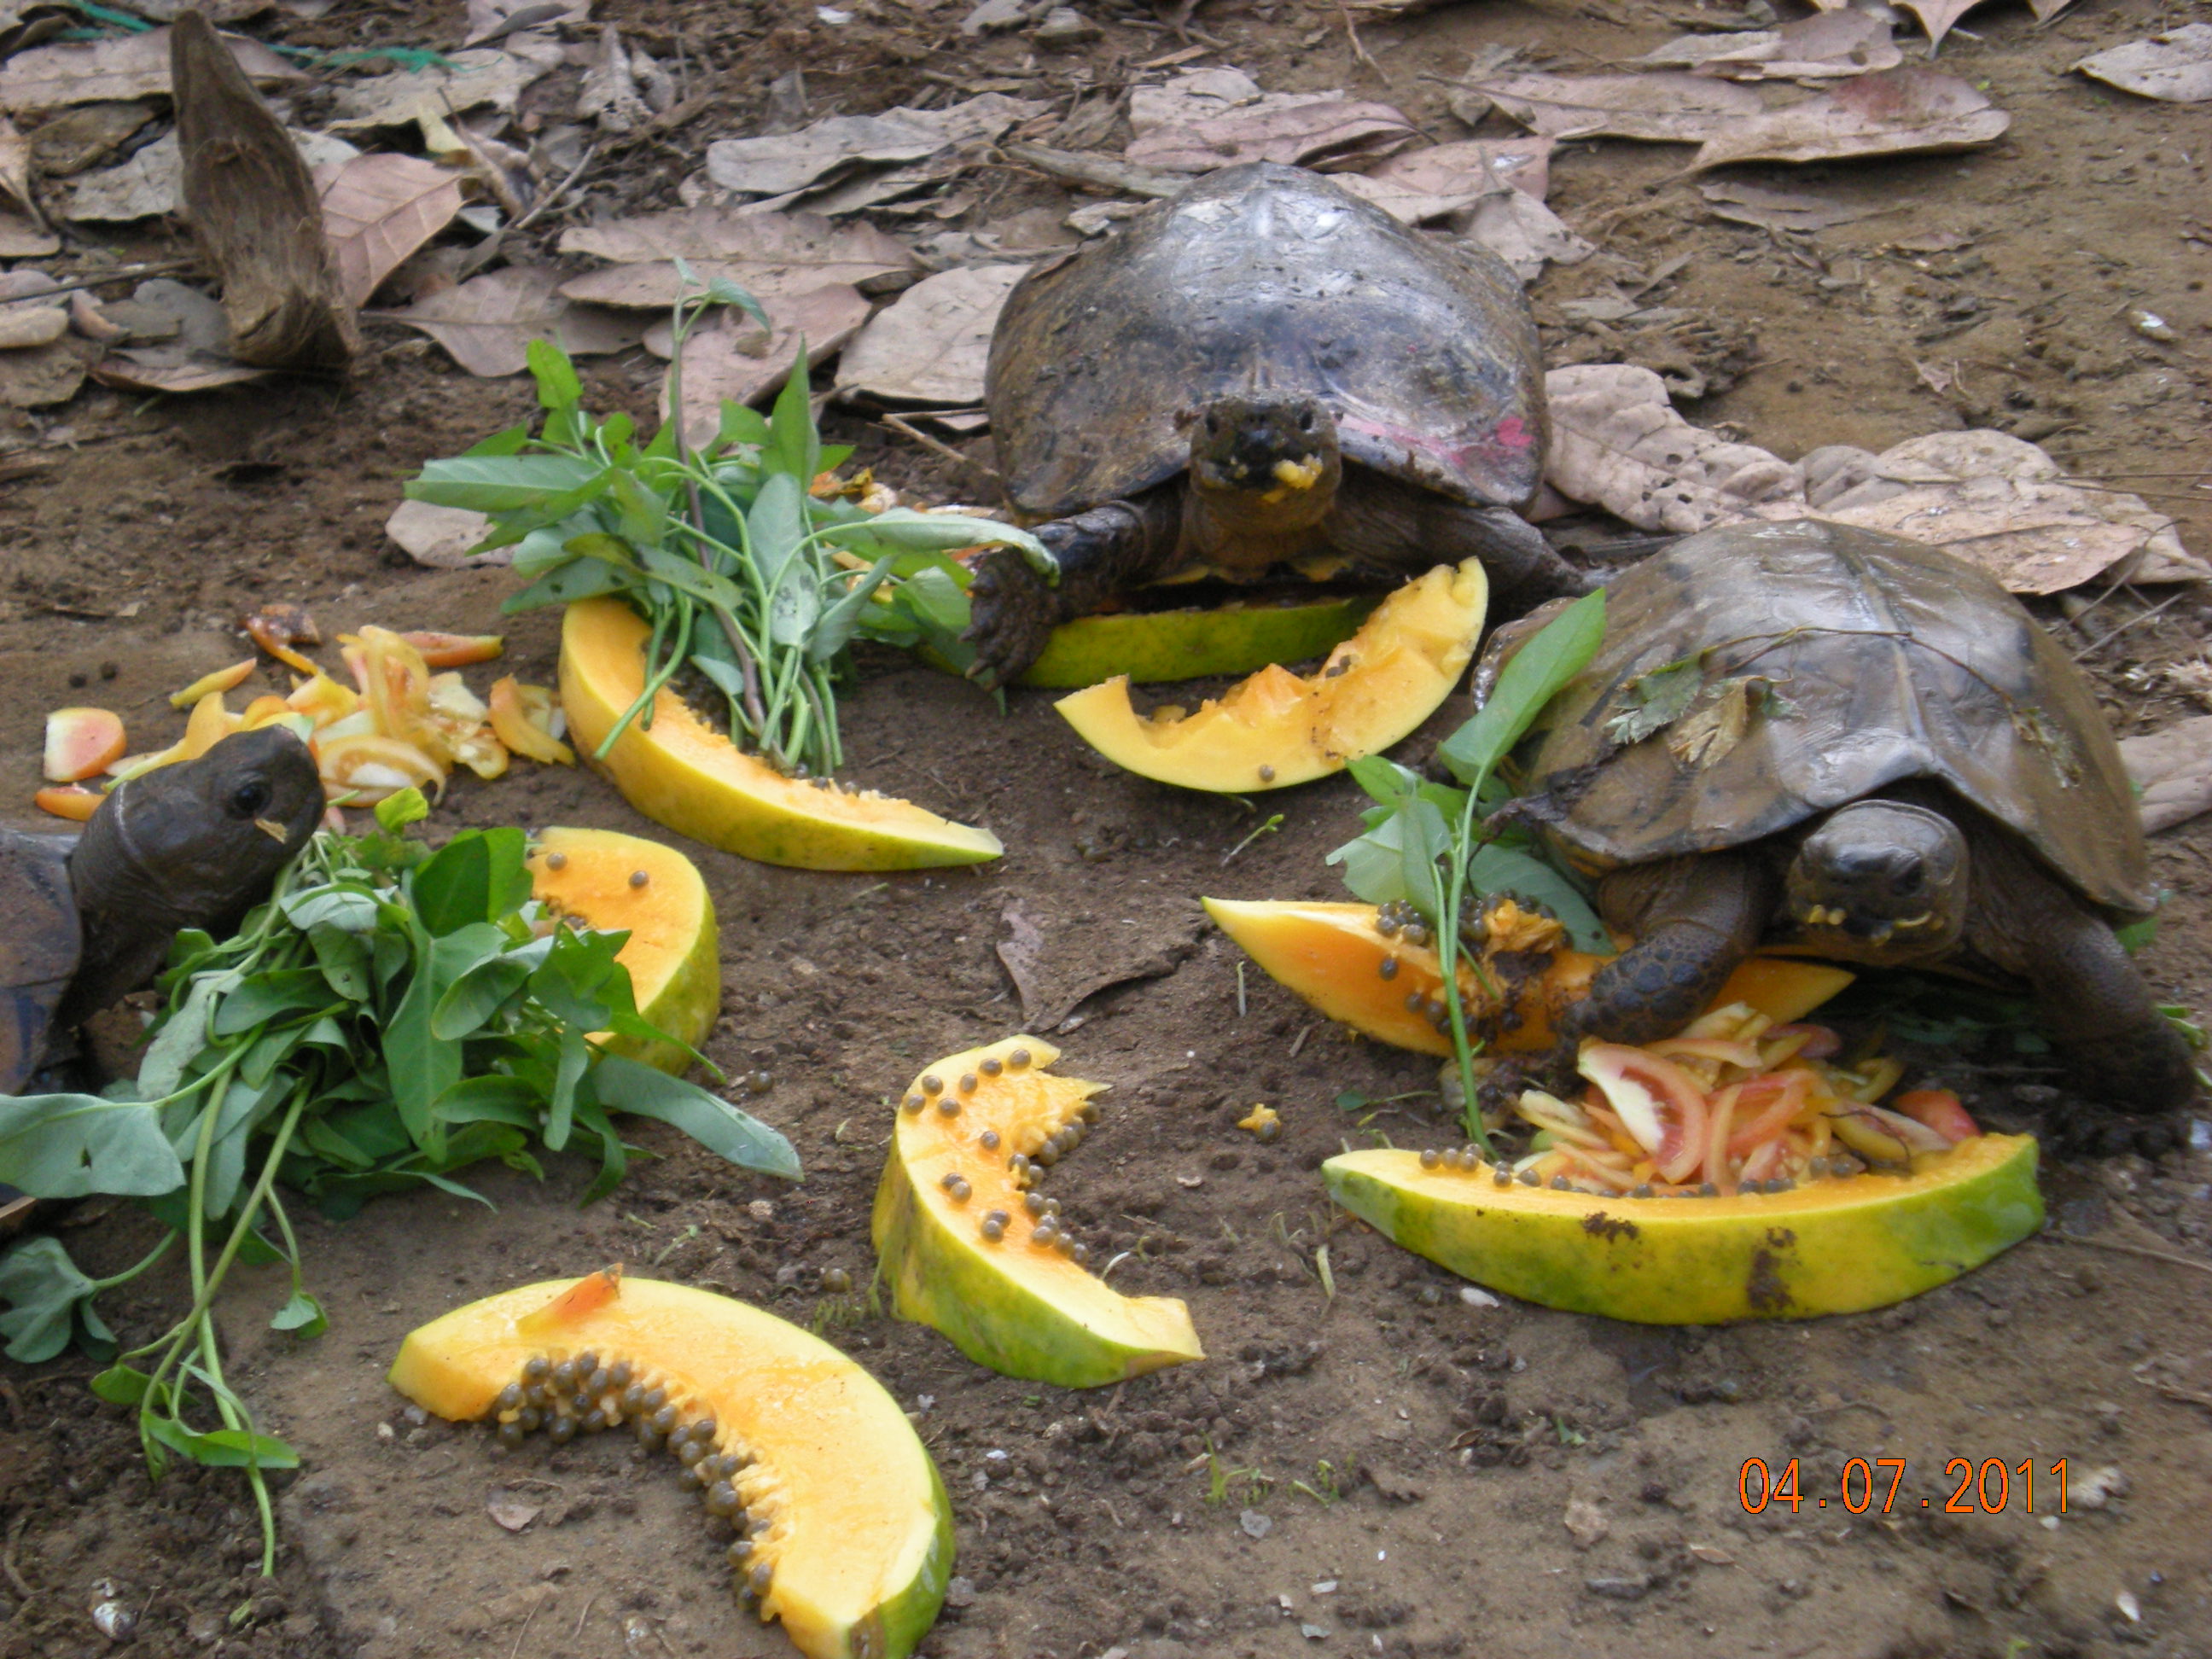 The_newly_arrived_turtles_feed_on_papaya_tomatoes_and_Ipomea